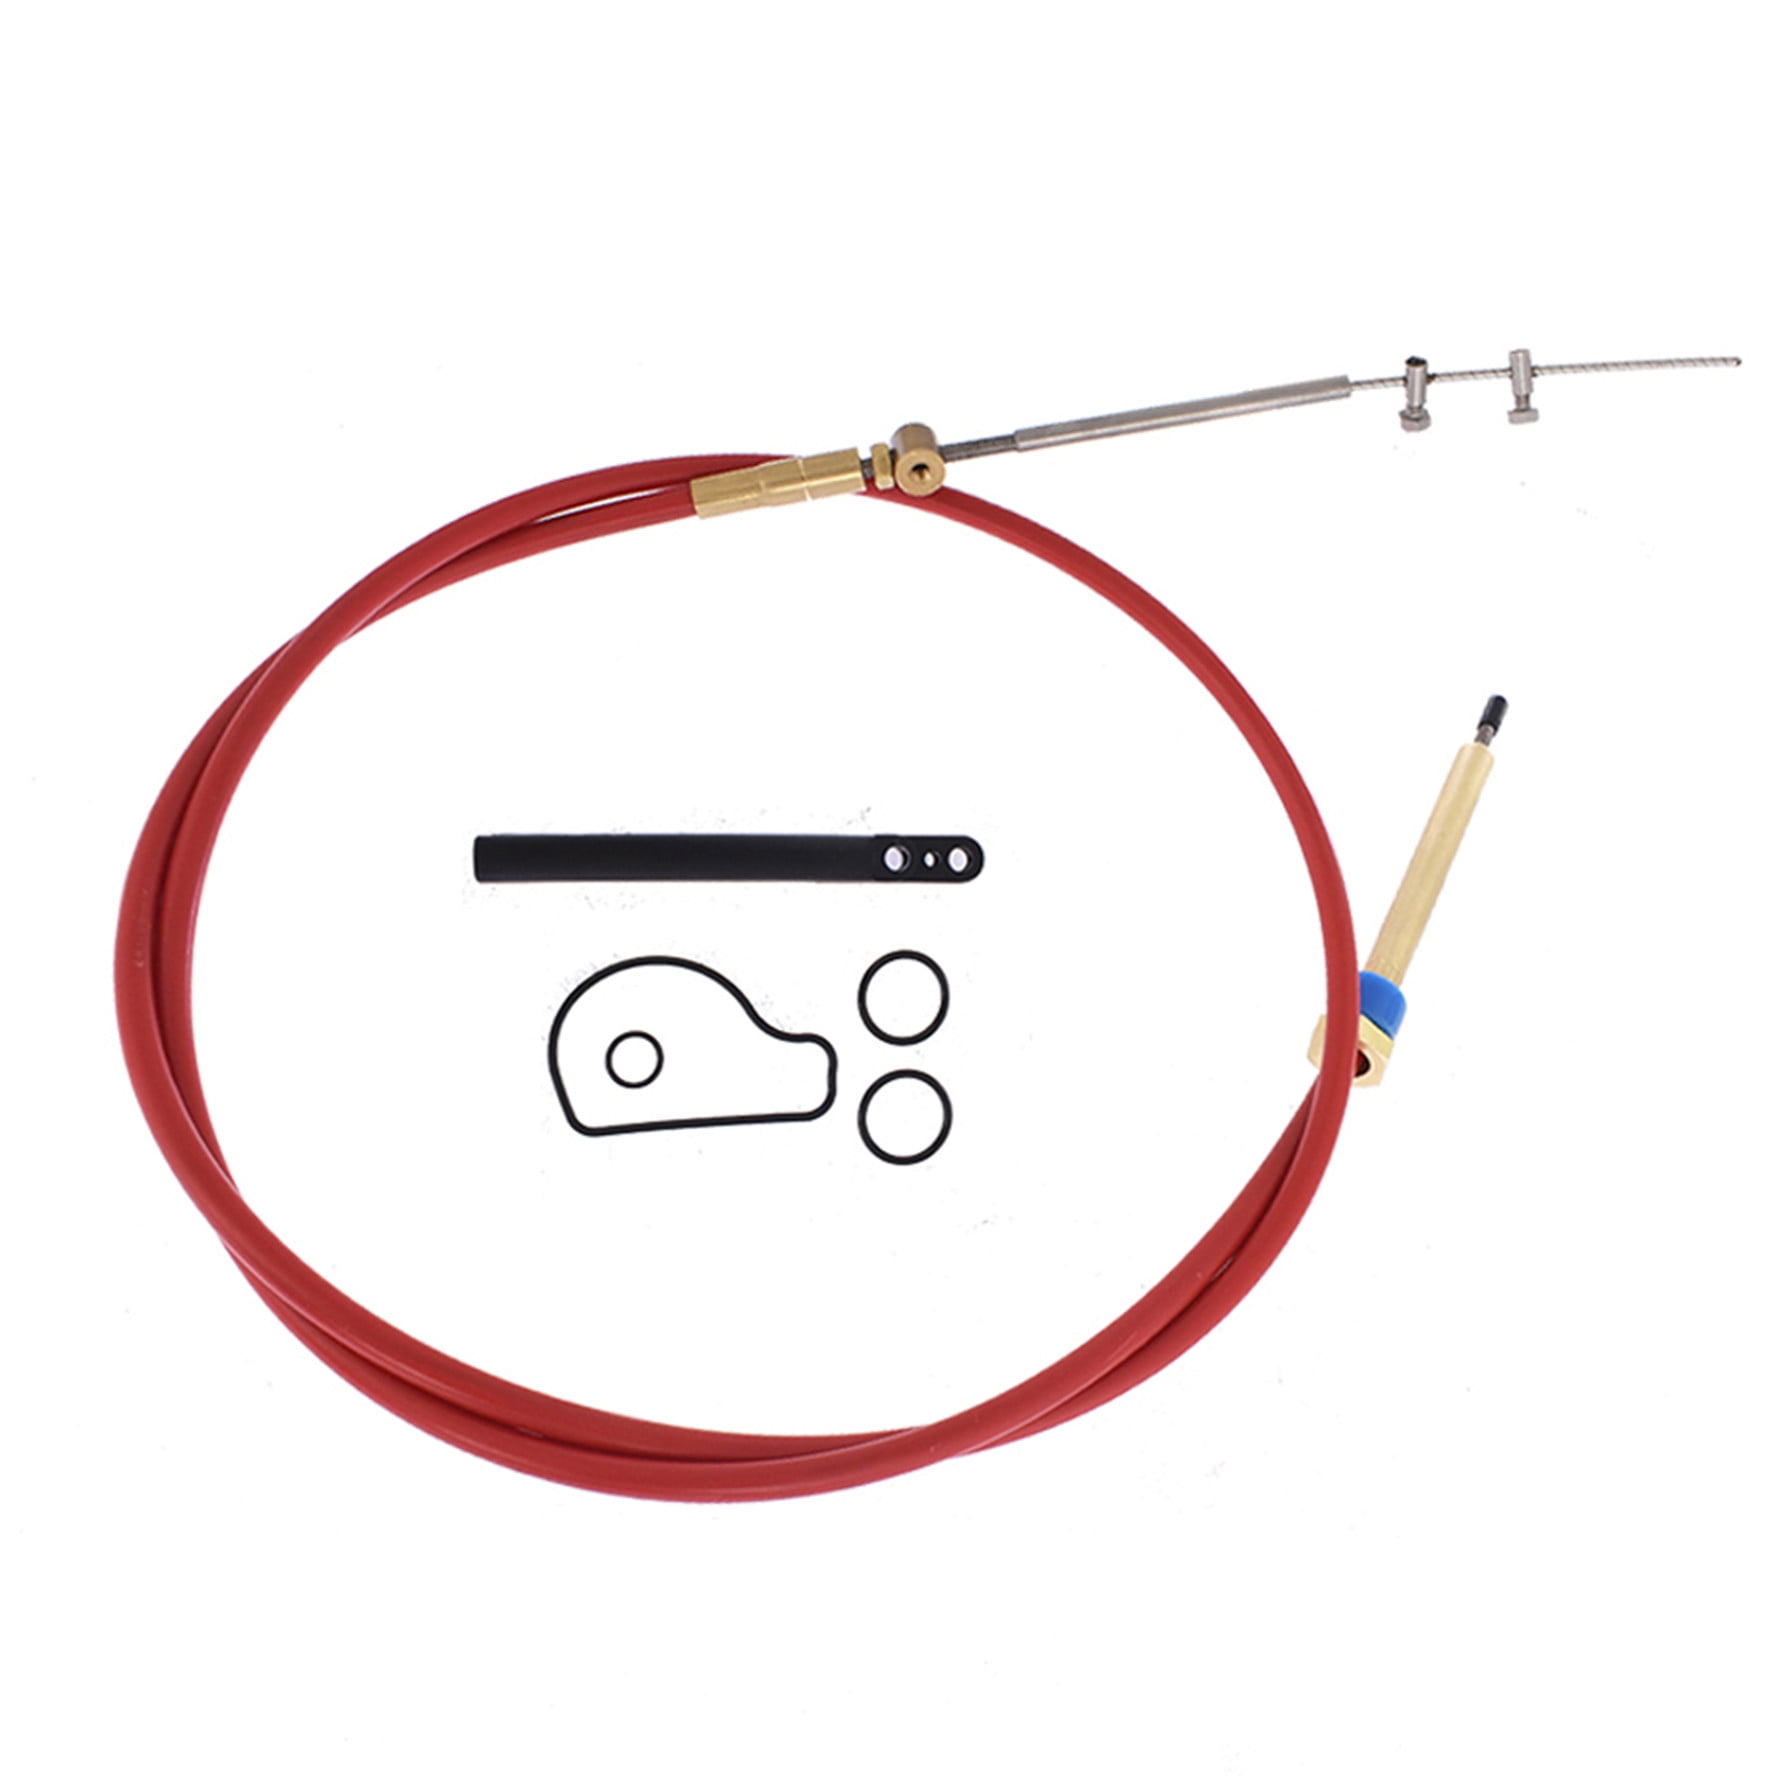 1x Lower Shift Cable Kit for OMC Cobra Sterndrive 986654 987661 